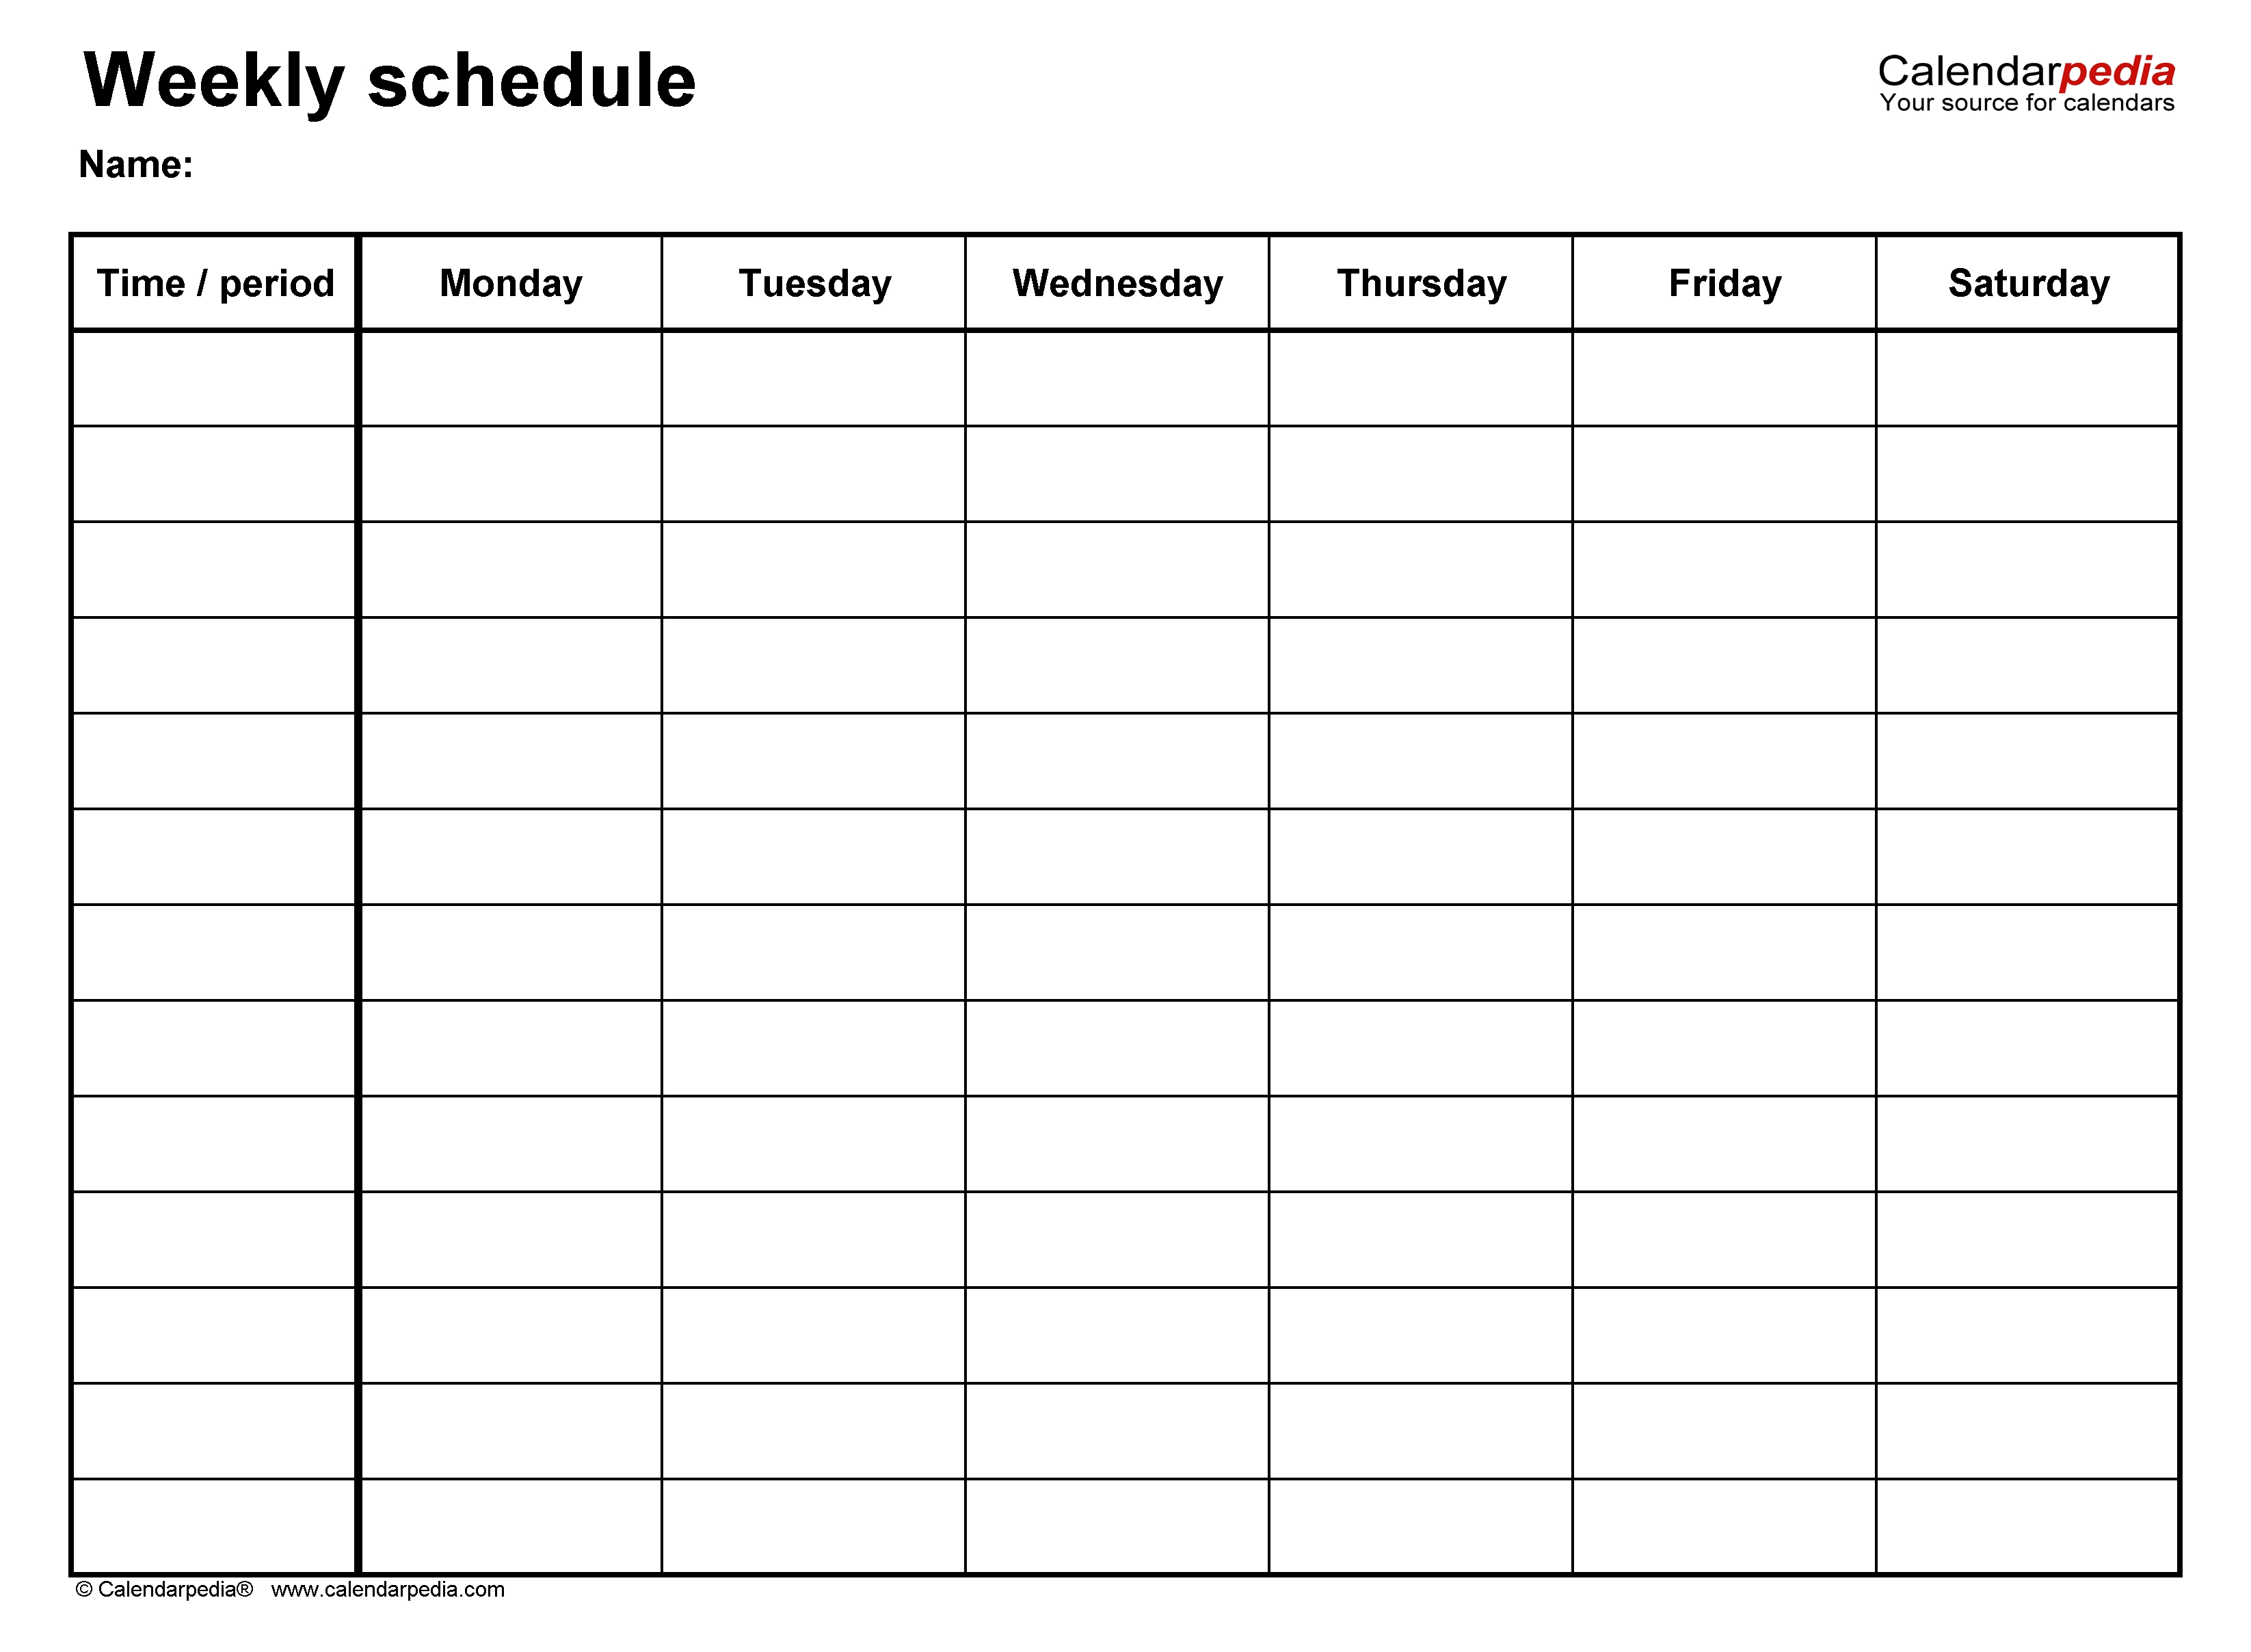 Free Weekly Schedule Templates For Pdf - 18 Templates-Monday To Sunday Calendar Template Writing Practice